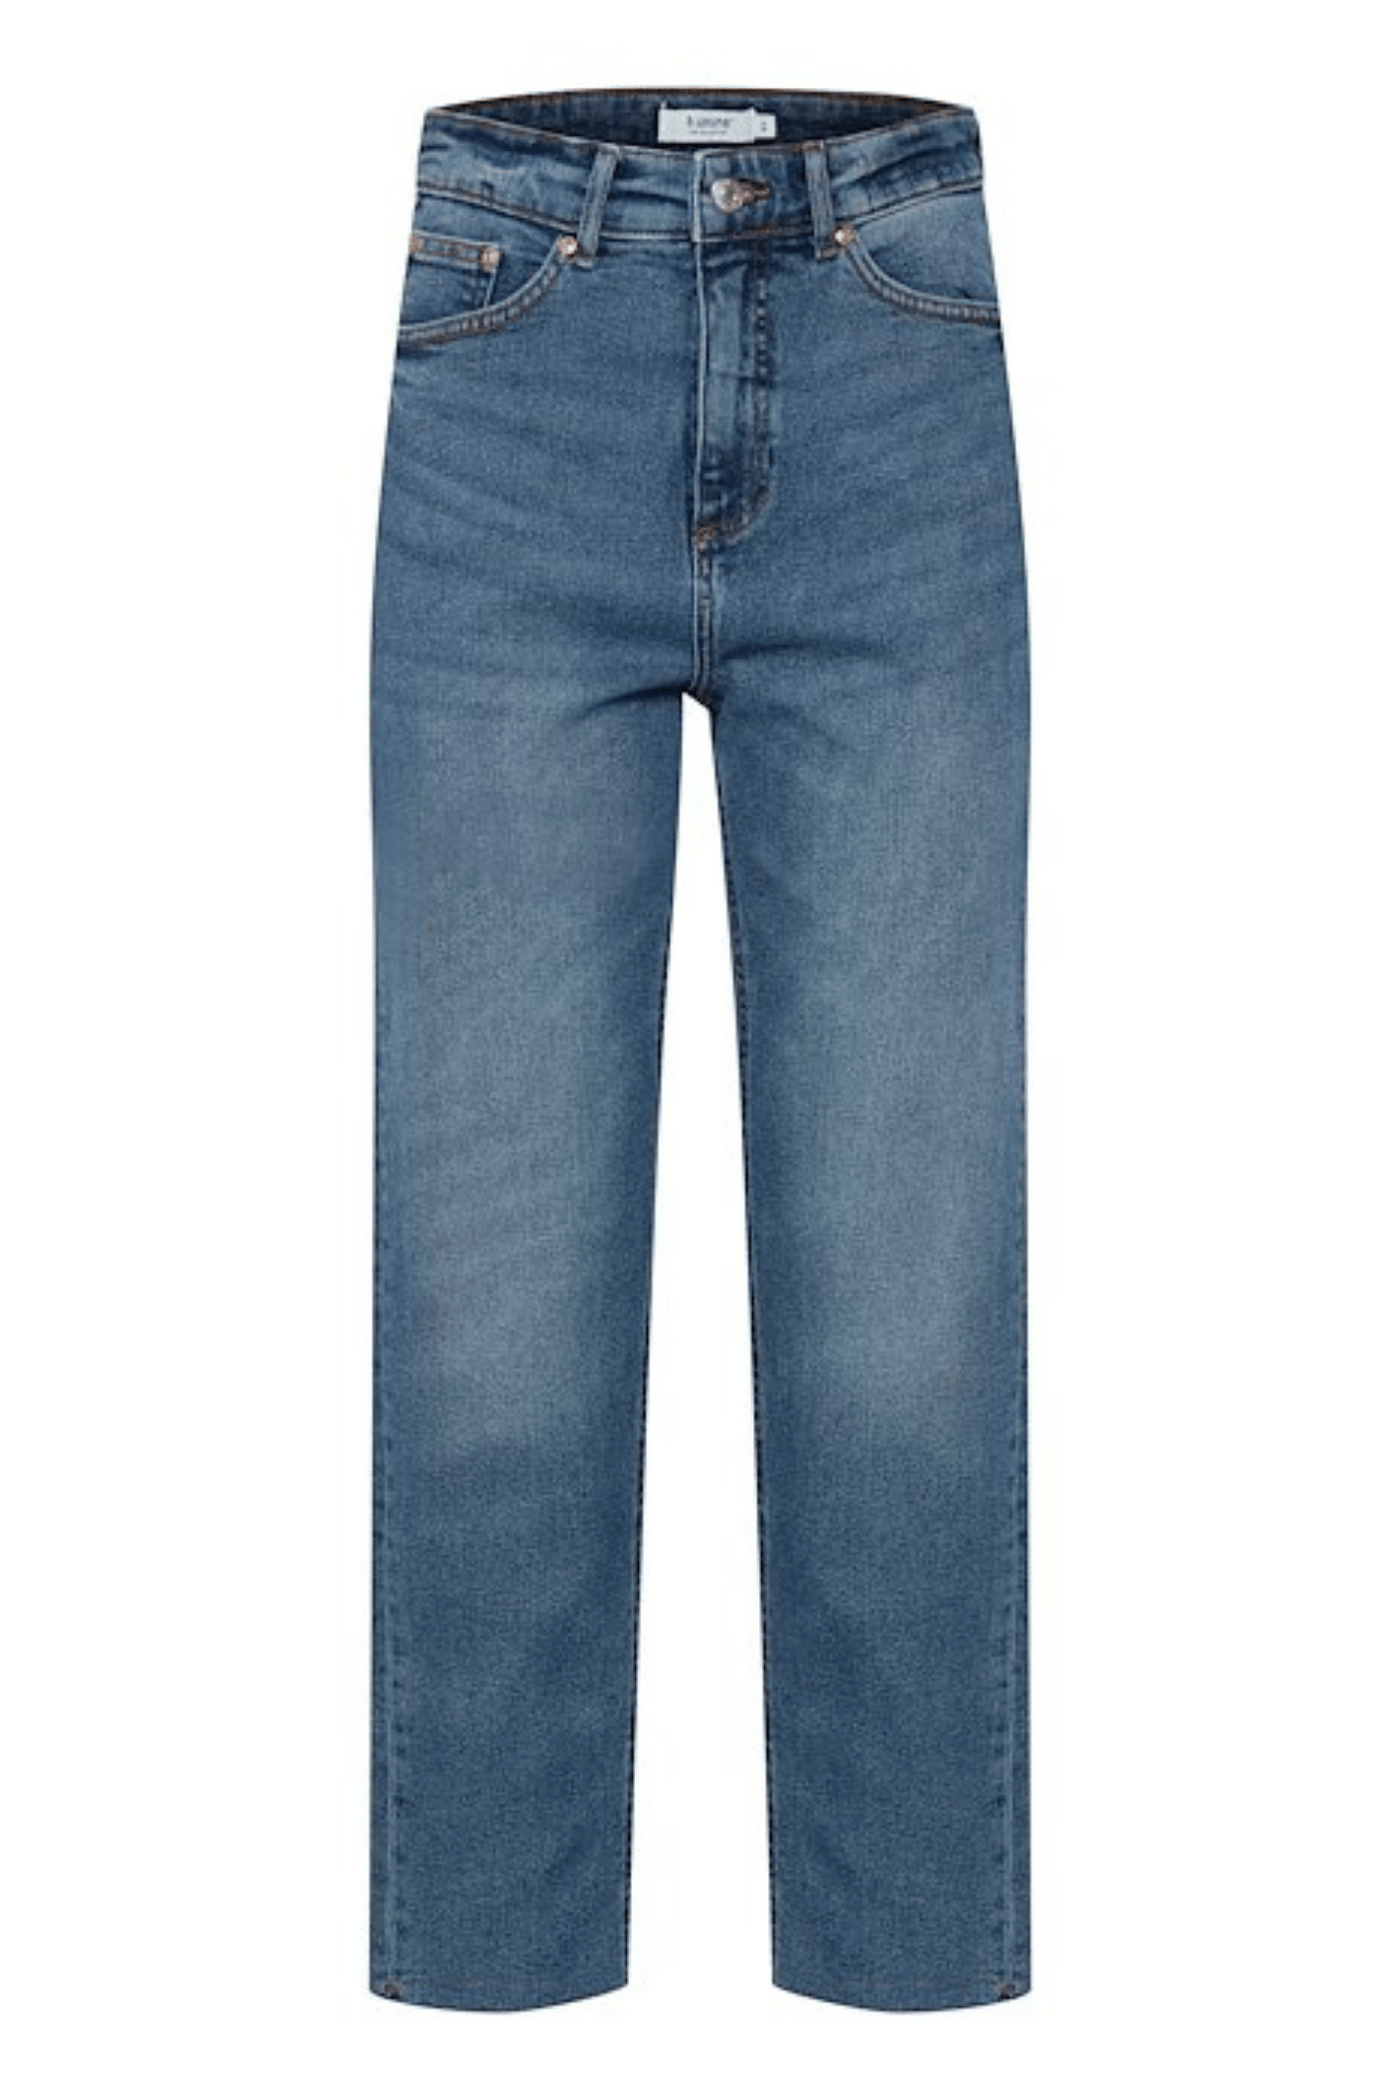 B. young Kato Lisa Straight Cropped Cut of Jeans - Jezabel Boutique